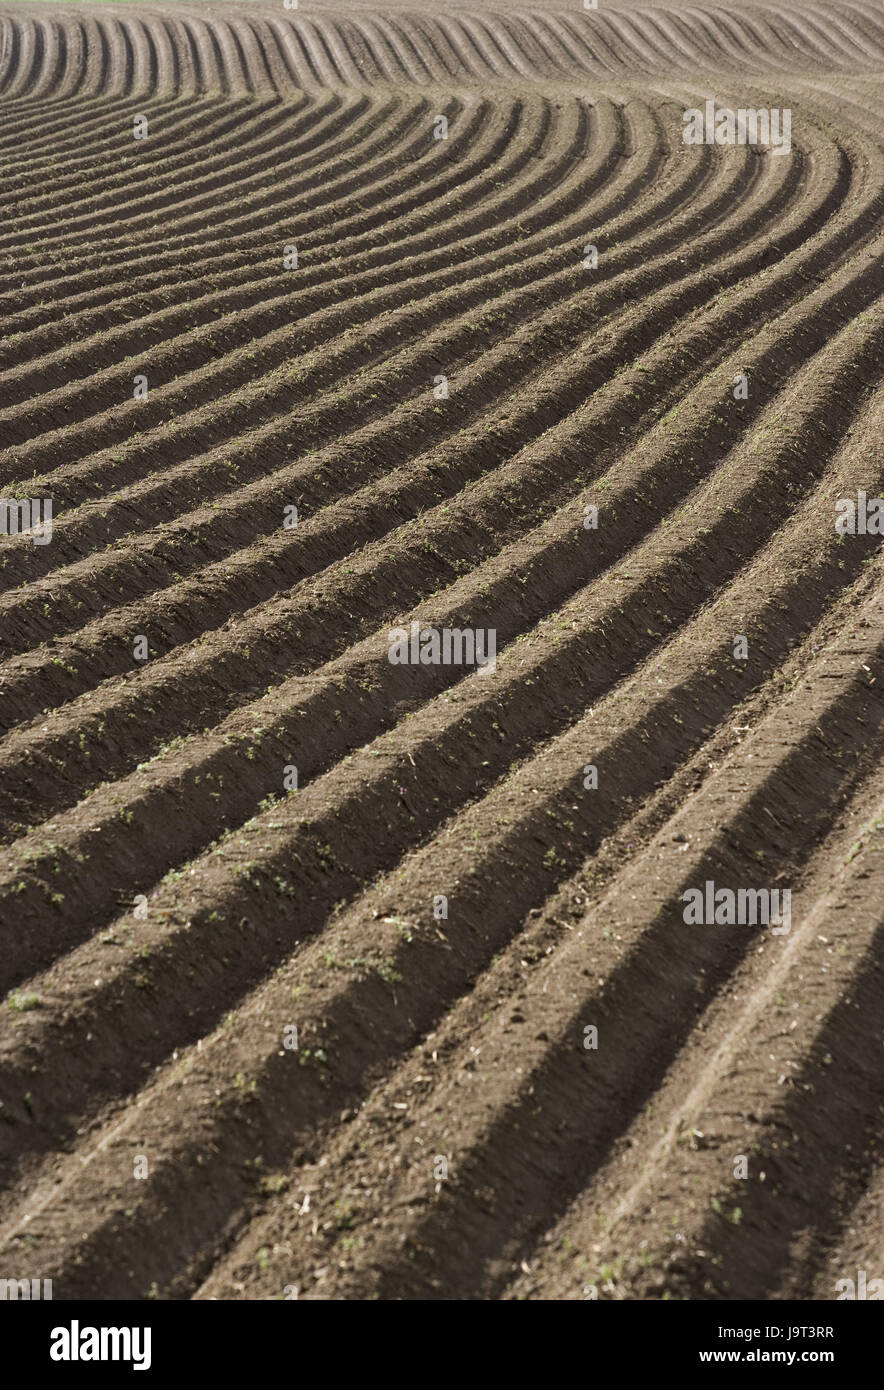 Field,economy,agriculture,field economy,agriculture,annex,cultivation,ground,grooves,field grooves,samples,series,sowing series,lines,brown,hilly,curved,growth,nobody,background, Stock Photo